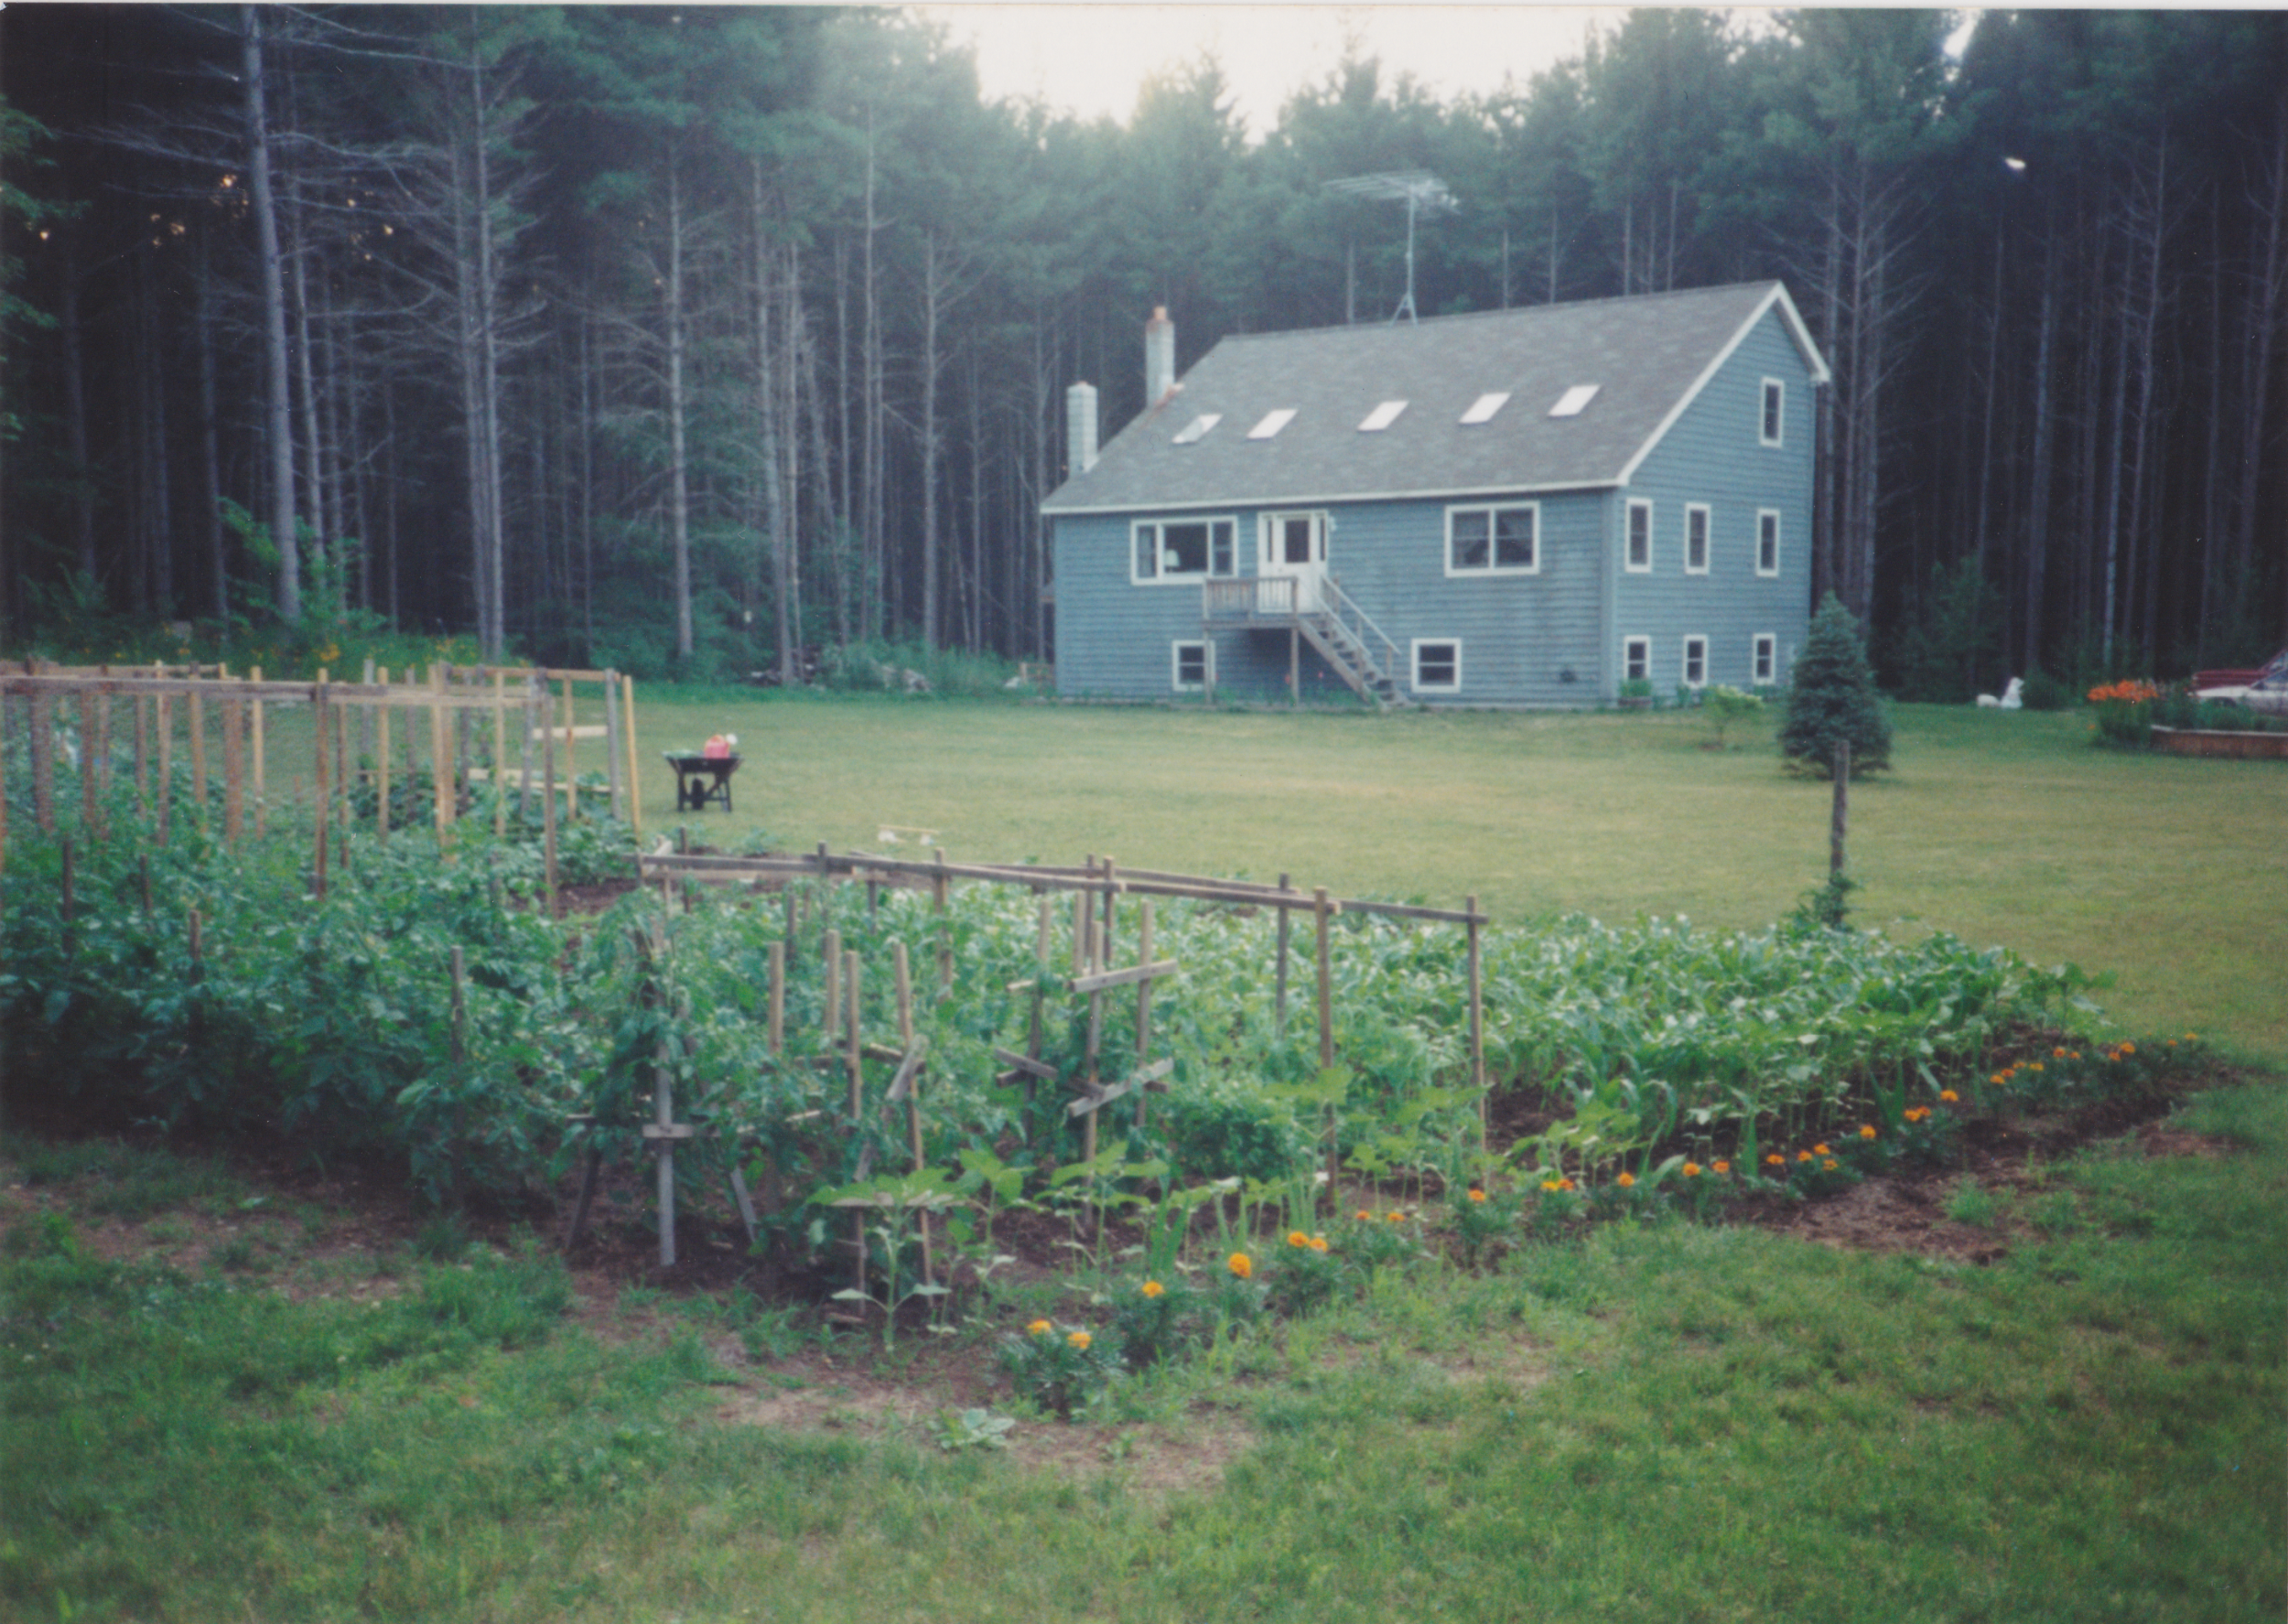 Curtis' childhood home and garden